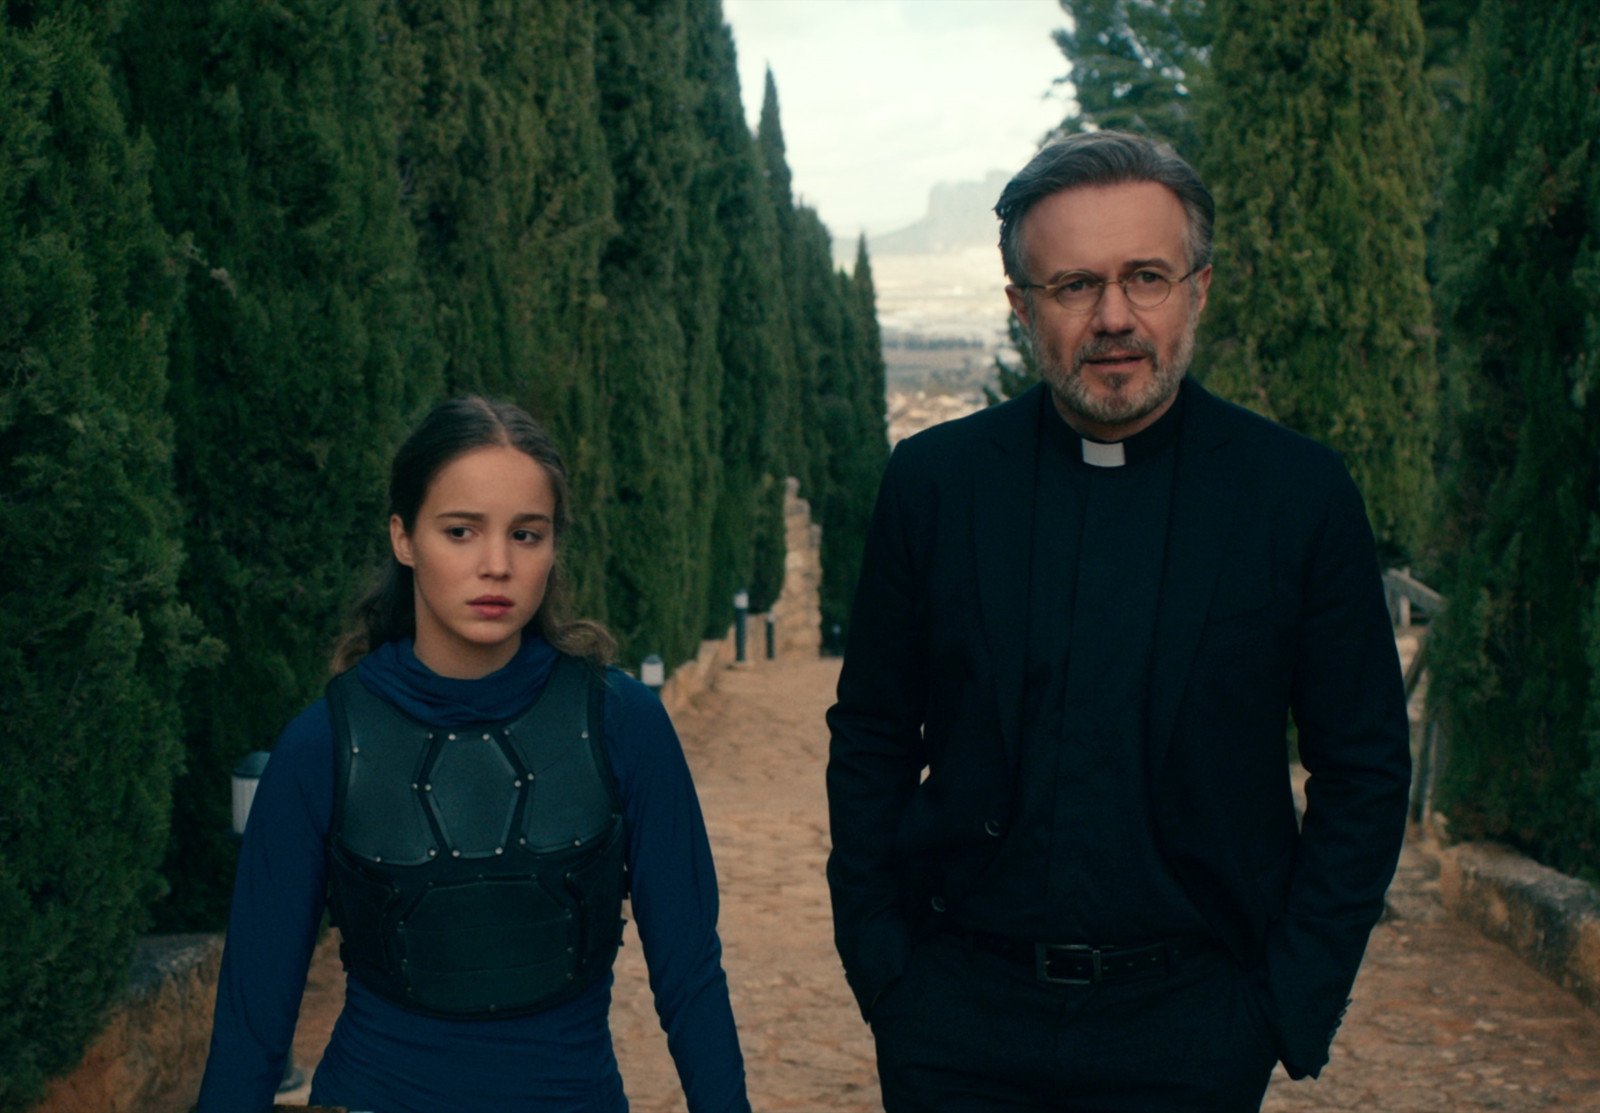 Alba Baptista and Tristán Ulloa in 'Warrior Nun' for our recap of season 1. They're walking side by side and there are trees behind them.